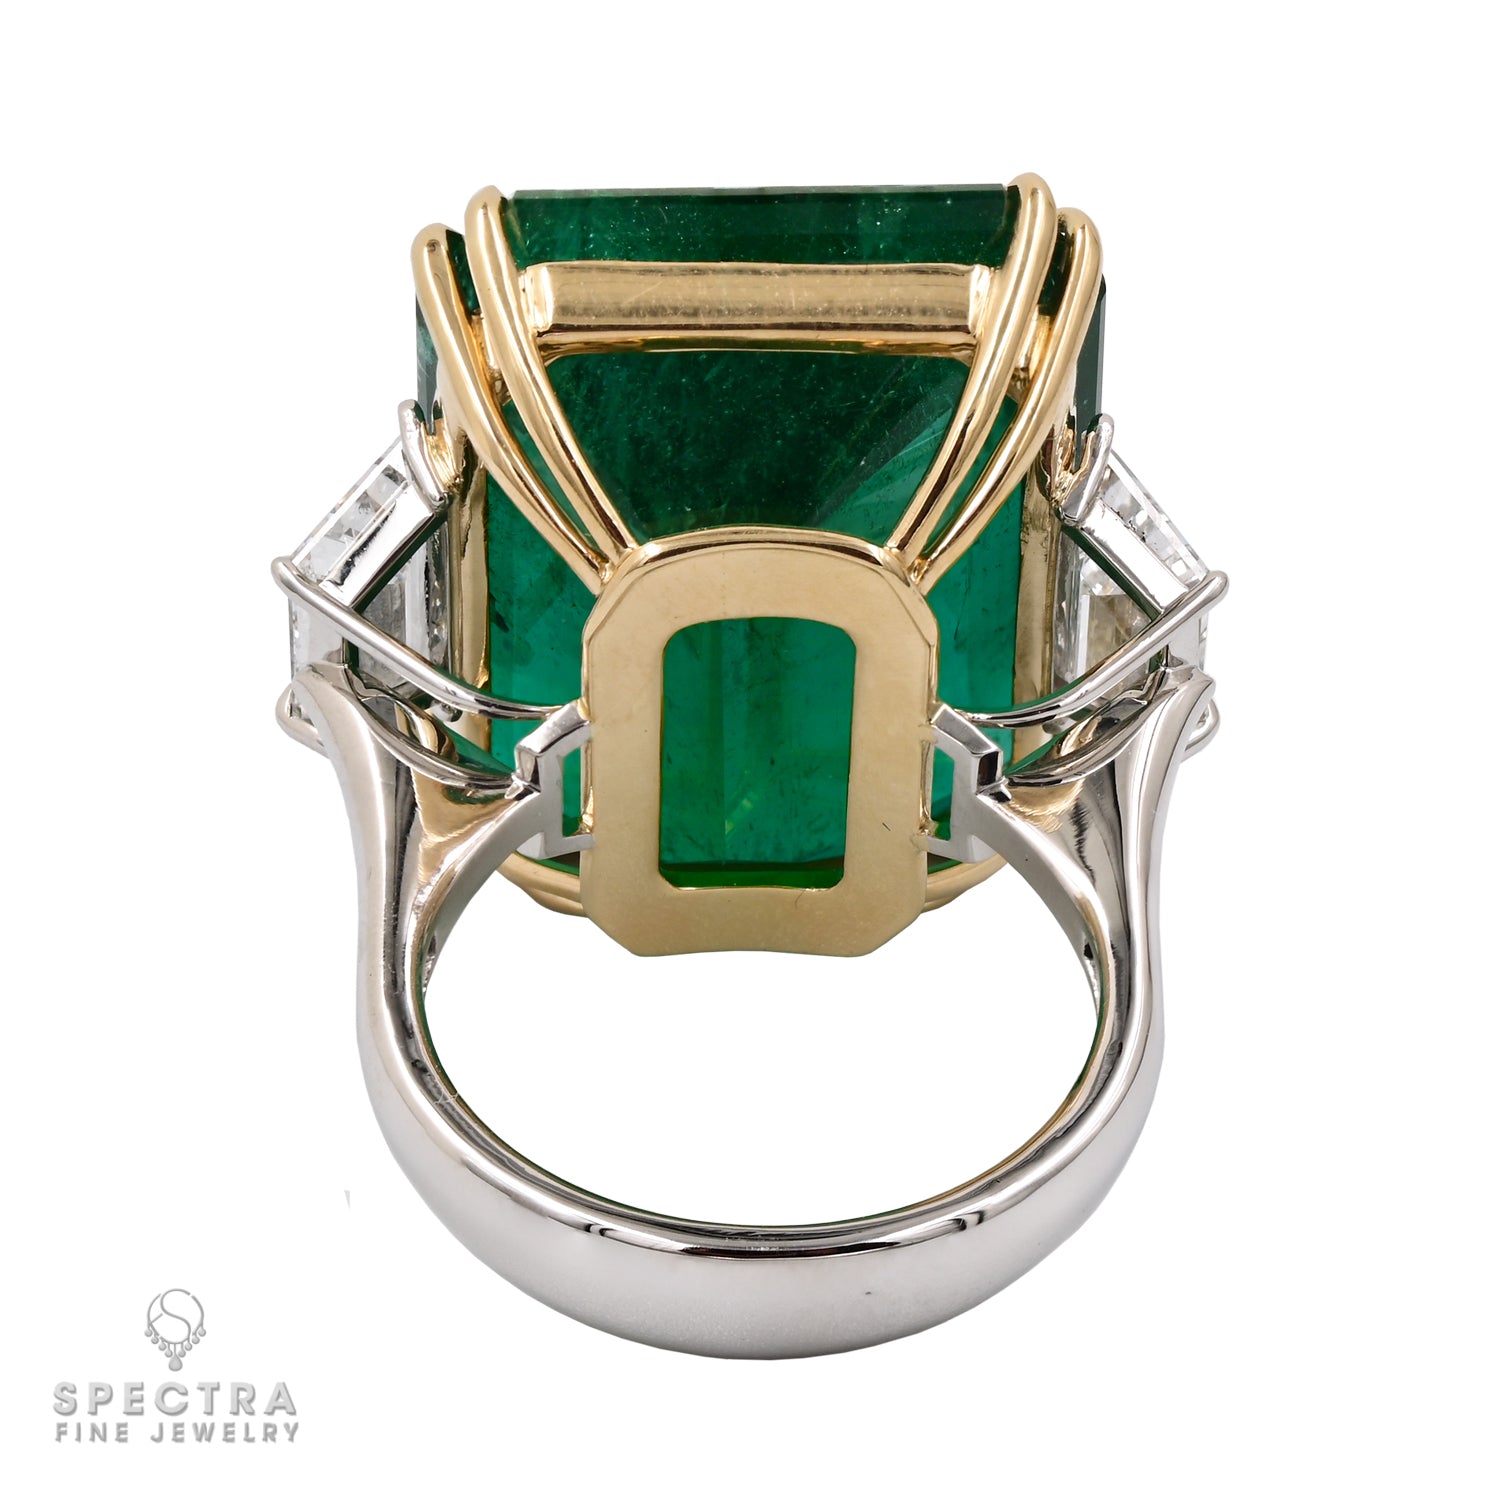 Spectra Fine Jewelry 34.73 ct. Zambian Emerald Cocktail Engagement Ring